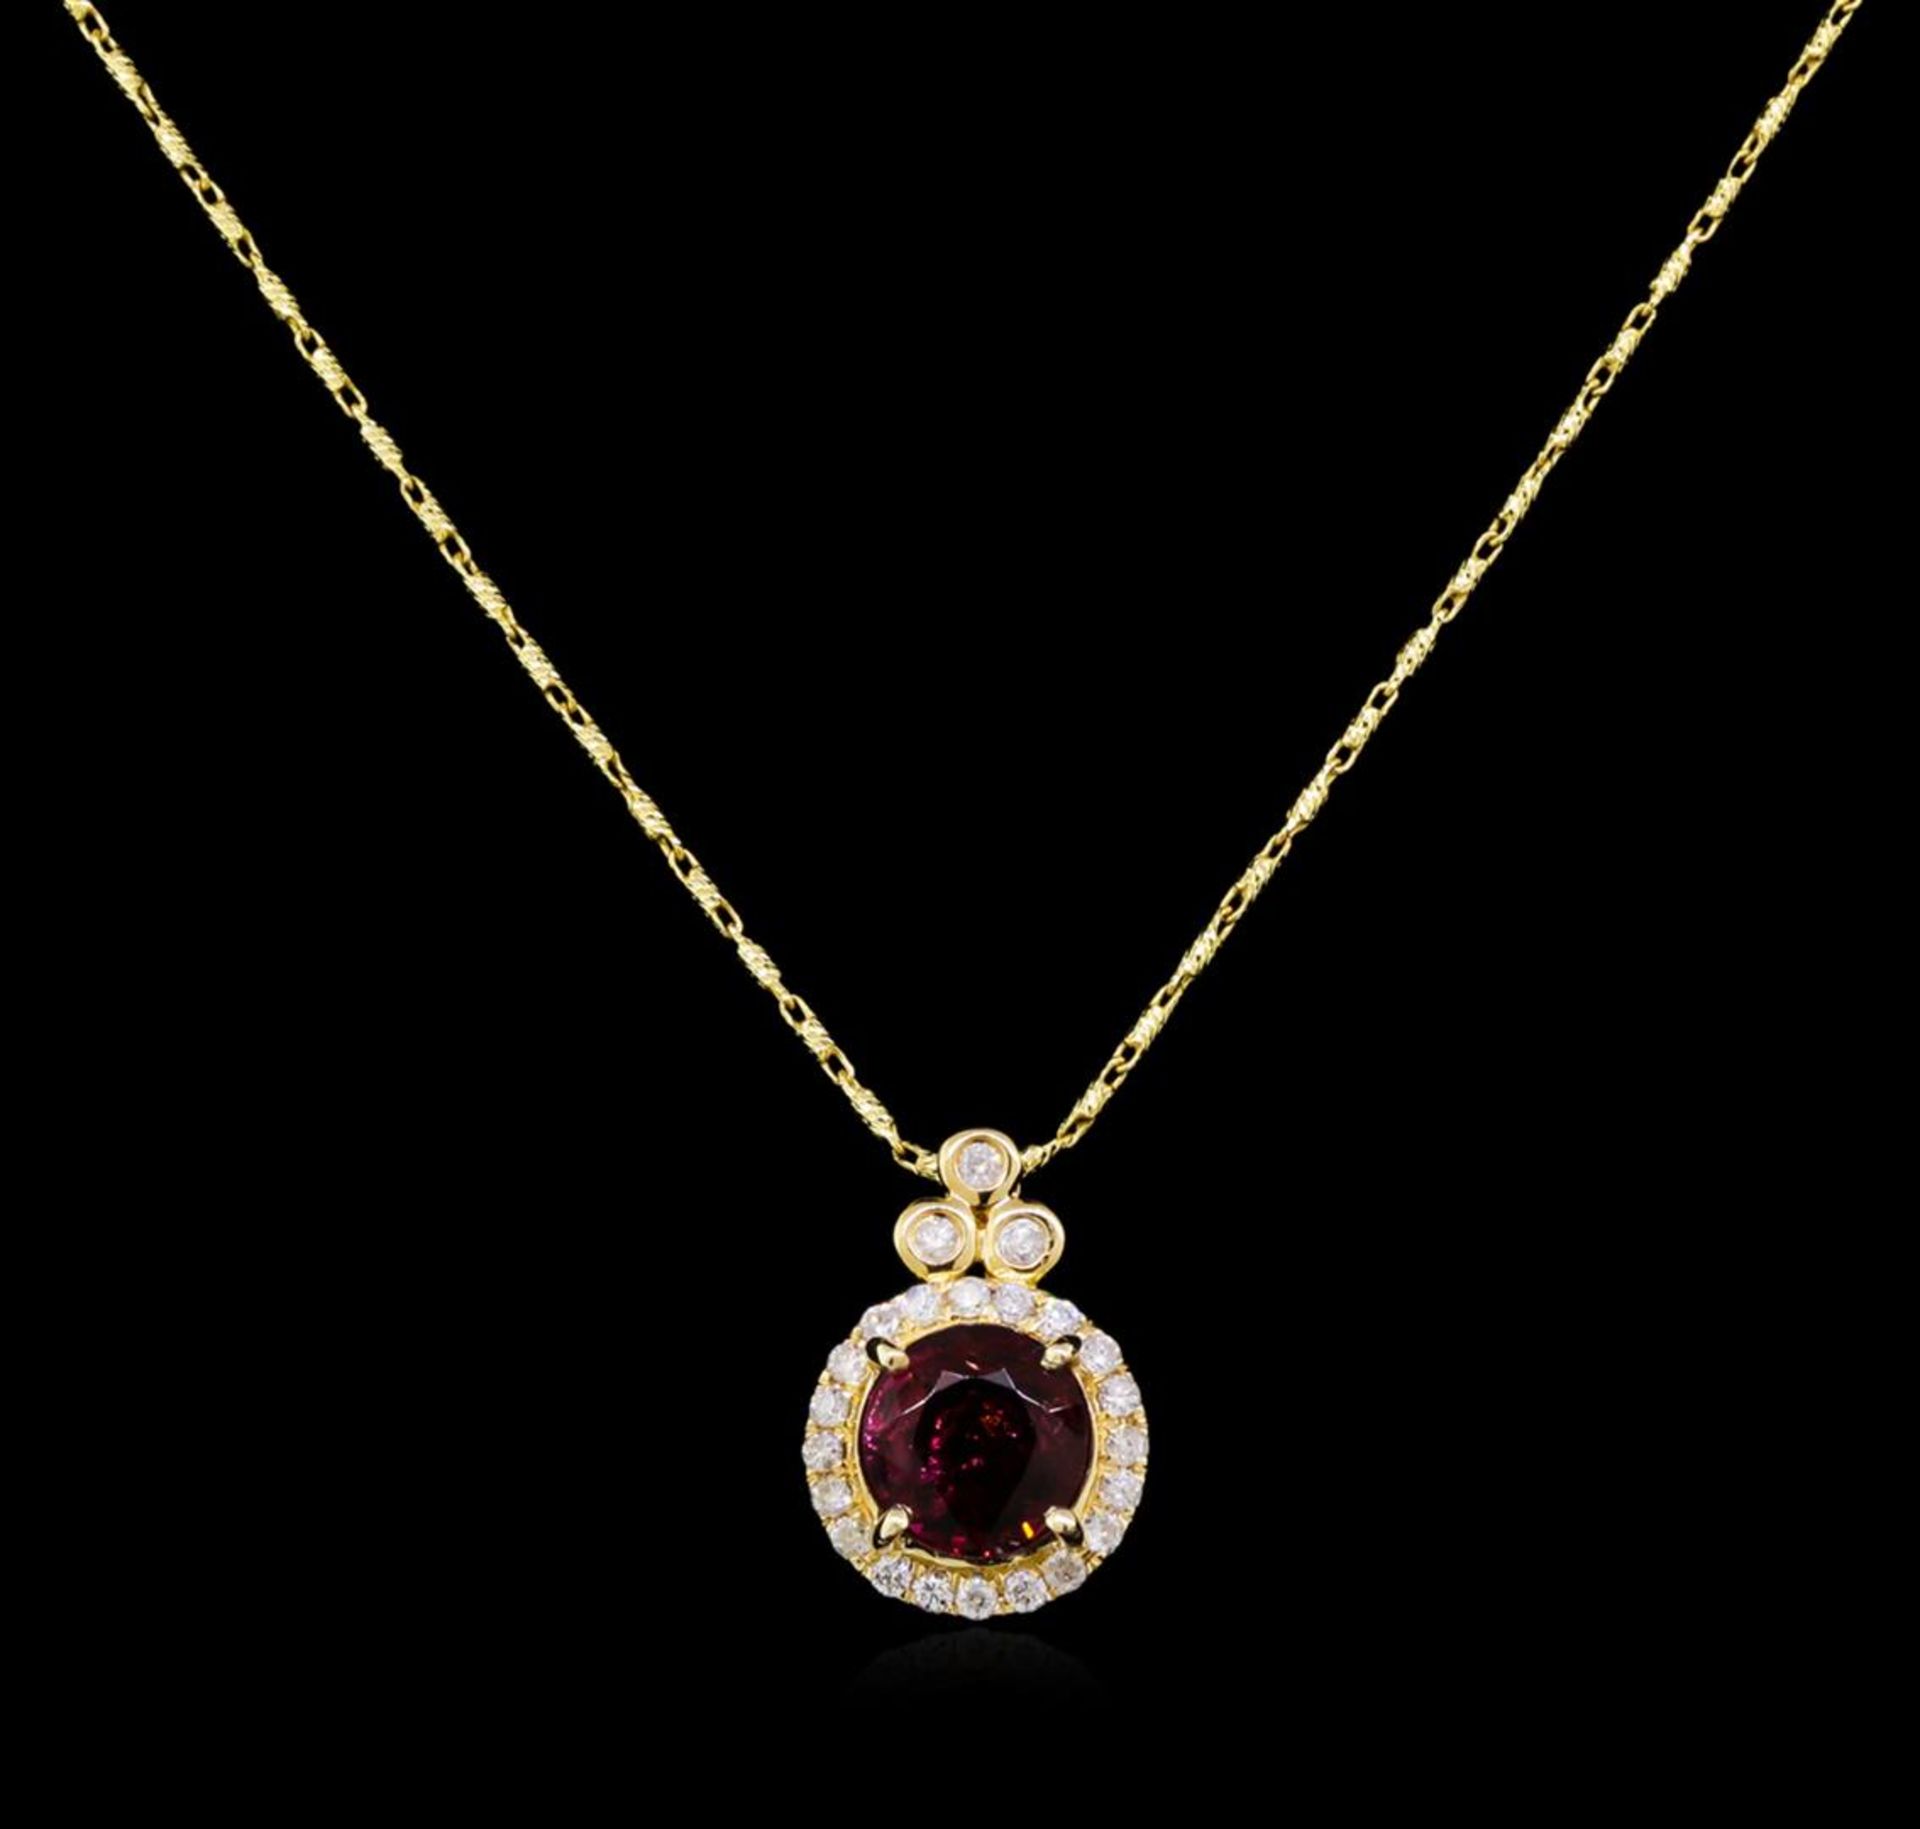 14KT Yellow Gold 2.12 ctw Rubellite and Diamond Pendant With Chain - Image 2 of 3